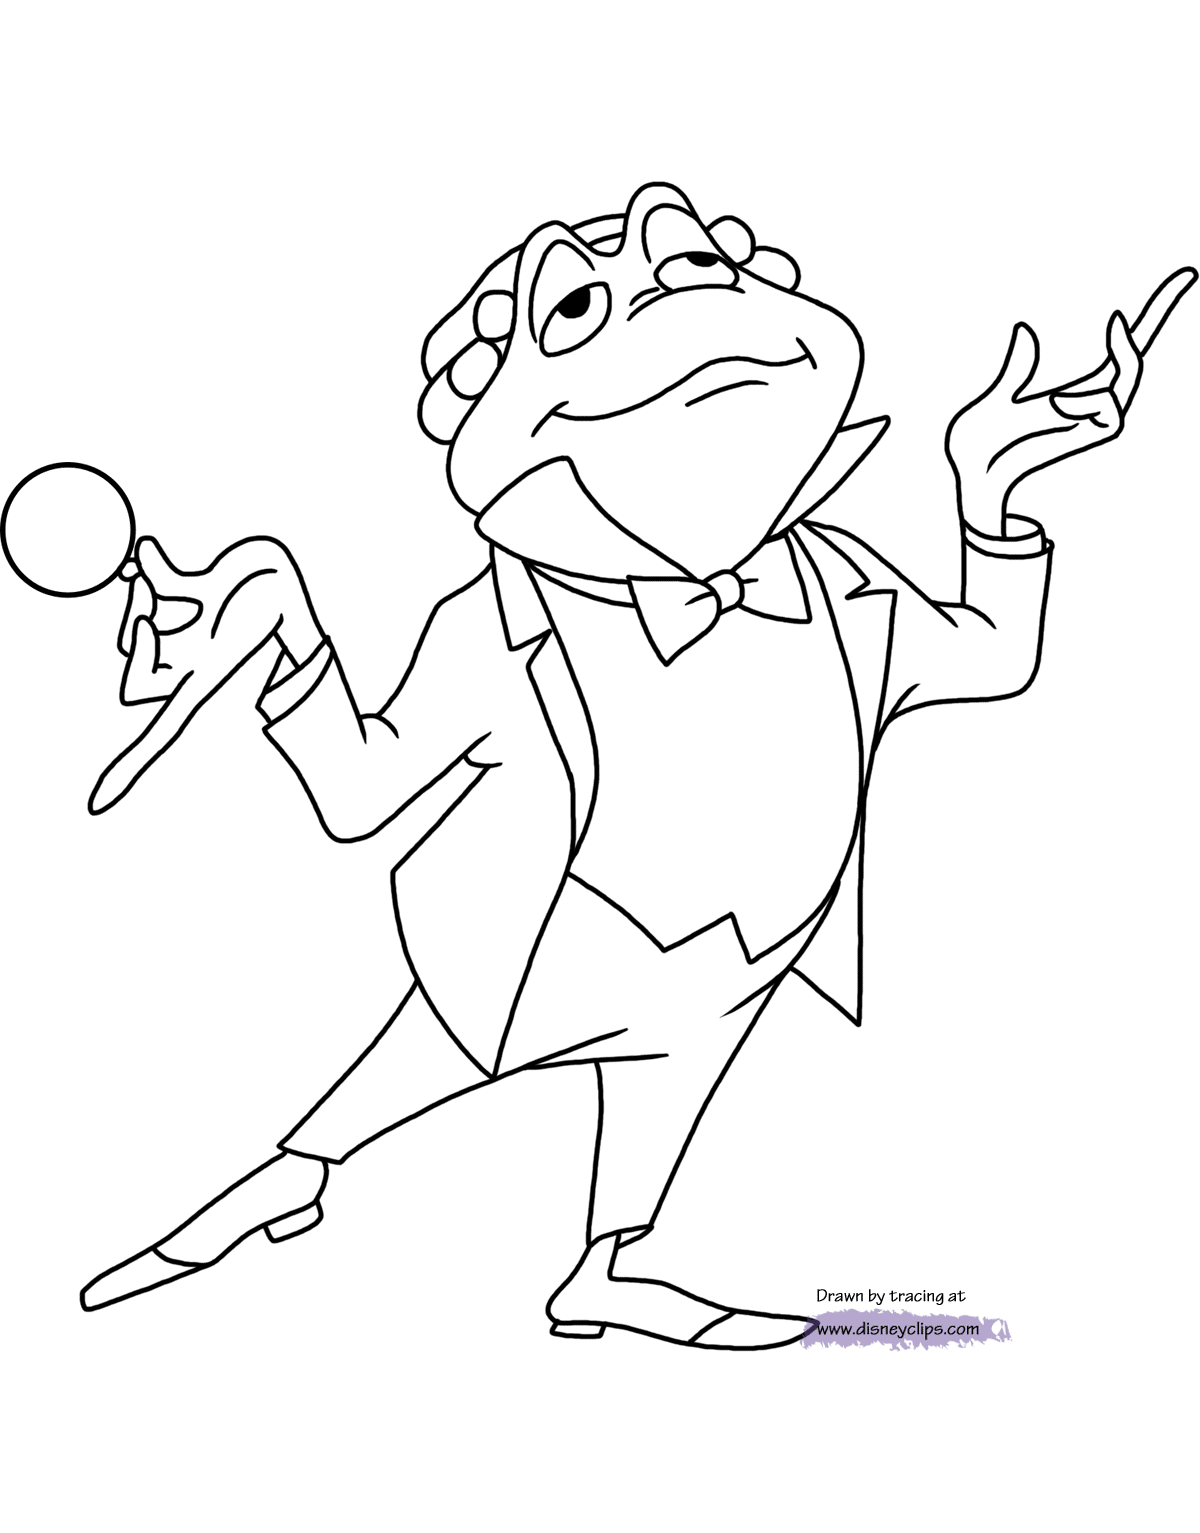 Ichabod and mr toad coloring pages